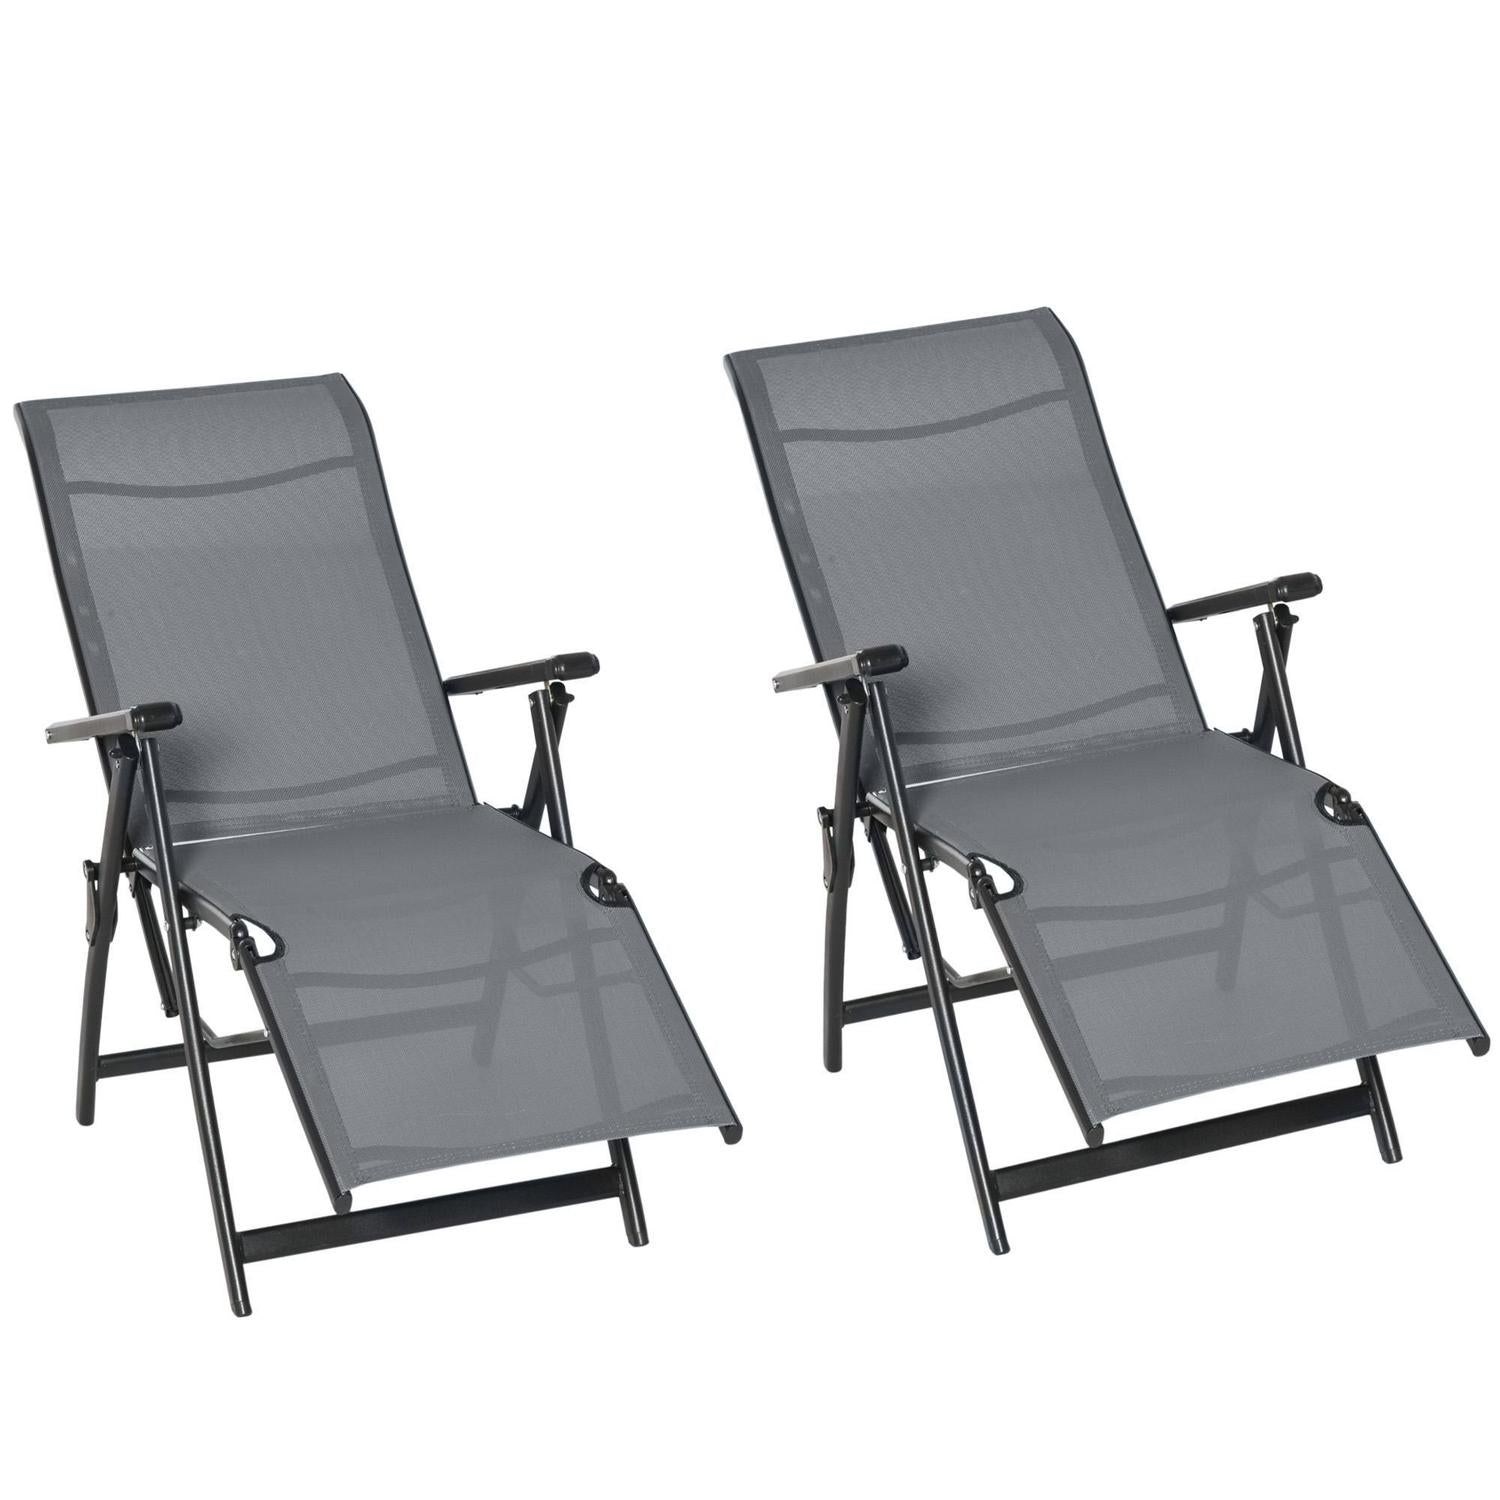 Recliner Outdoor Patio Chaise Lounge Chair Adjustable Backrest Set Of 2